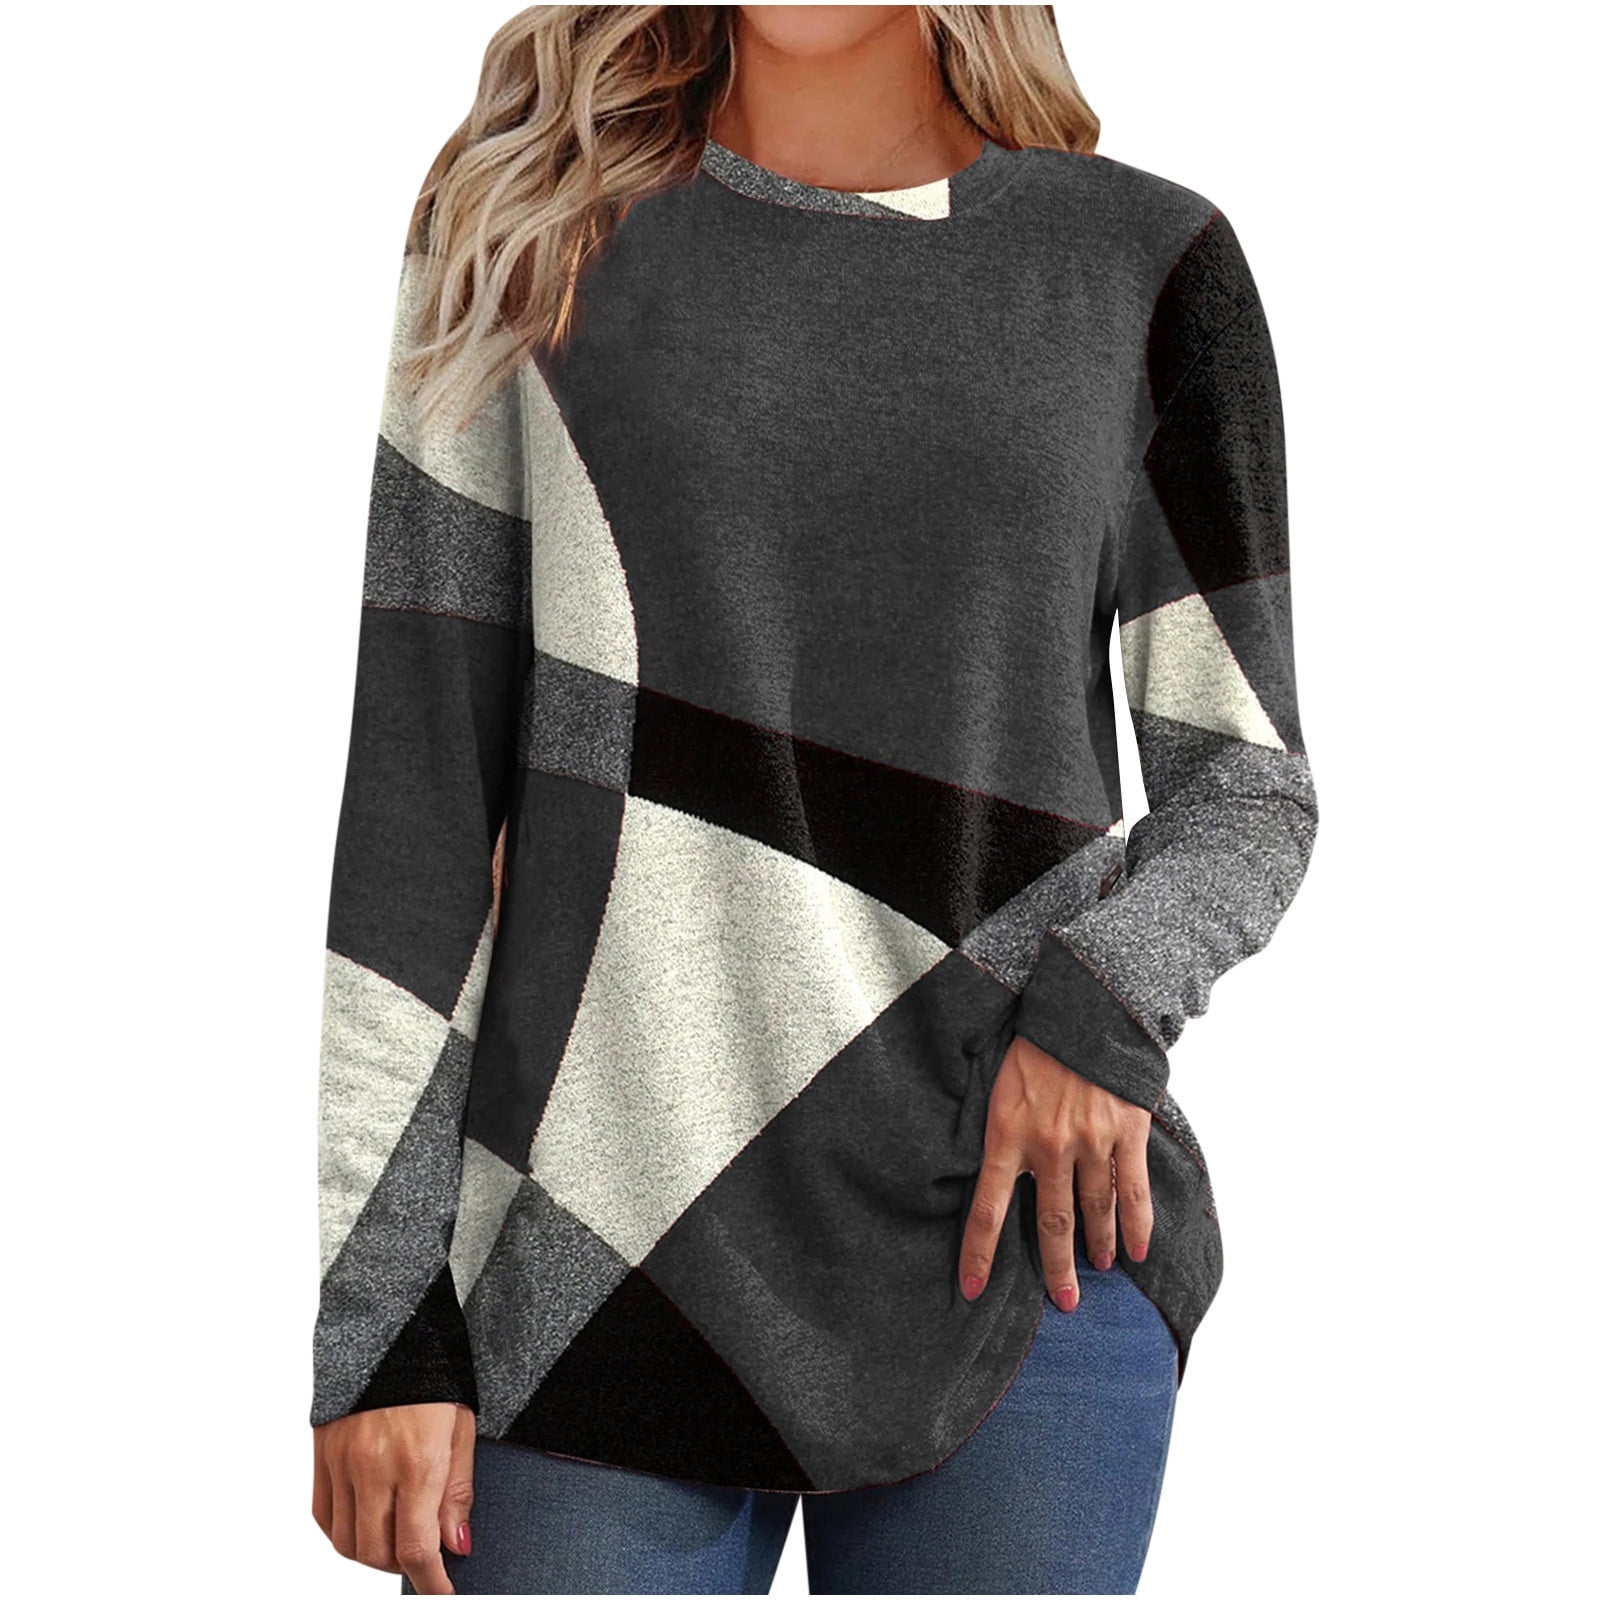 BELLZELY Womens Tops Long Sleeve Clearance Women's Casual Round Neck ...